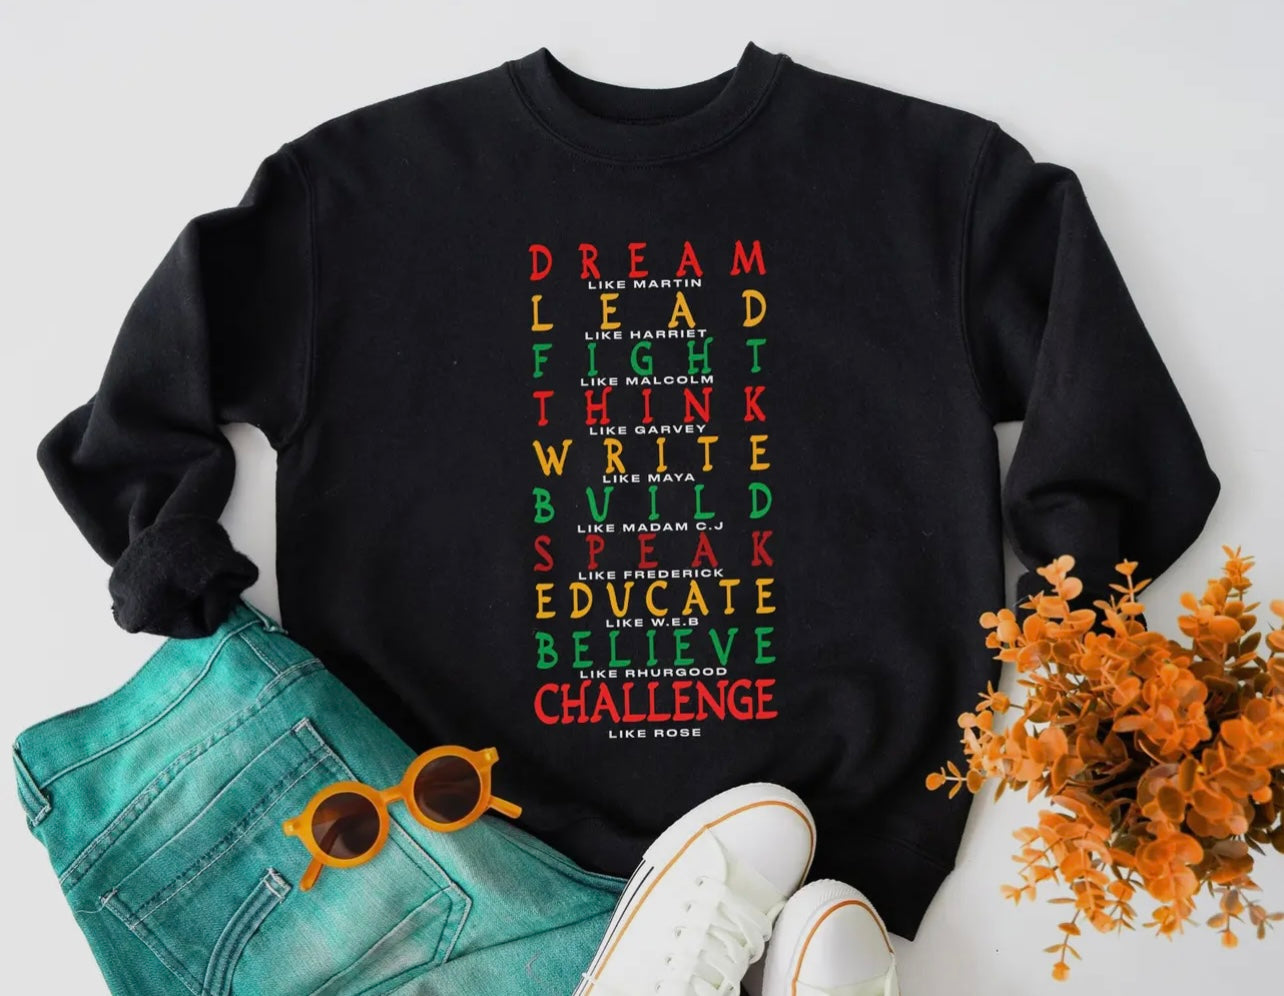 Pre-order by 1/20 to ship out by 2/4 “Trailblazer” Black History Sweatshirt